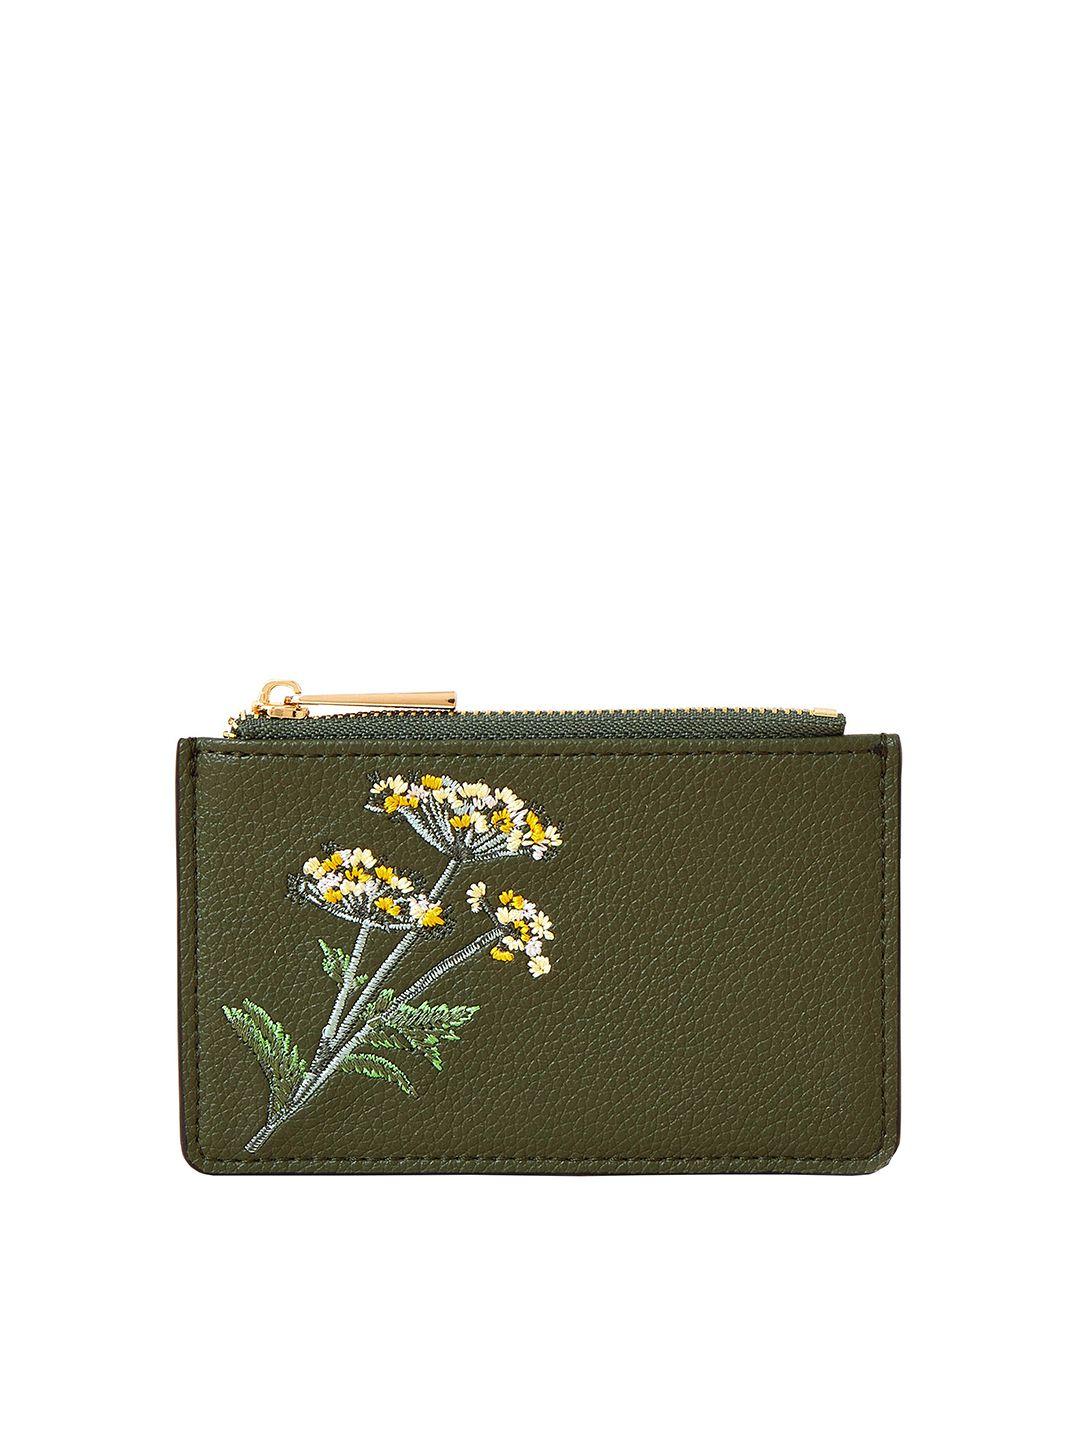 accessorize women olive green & off white floral printed card holder